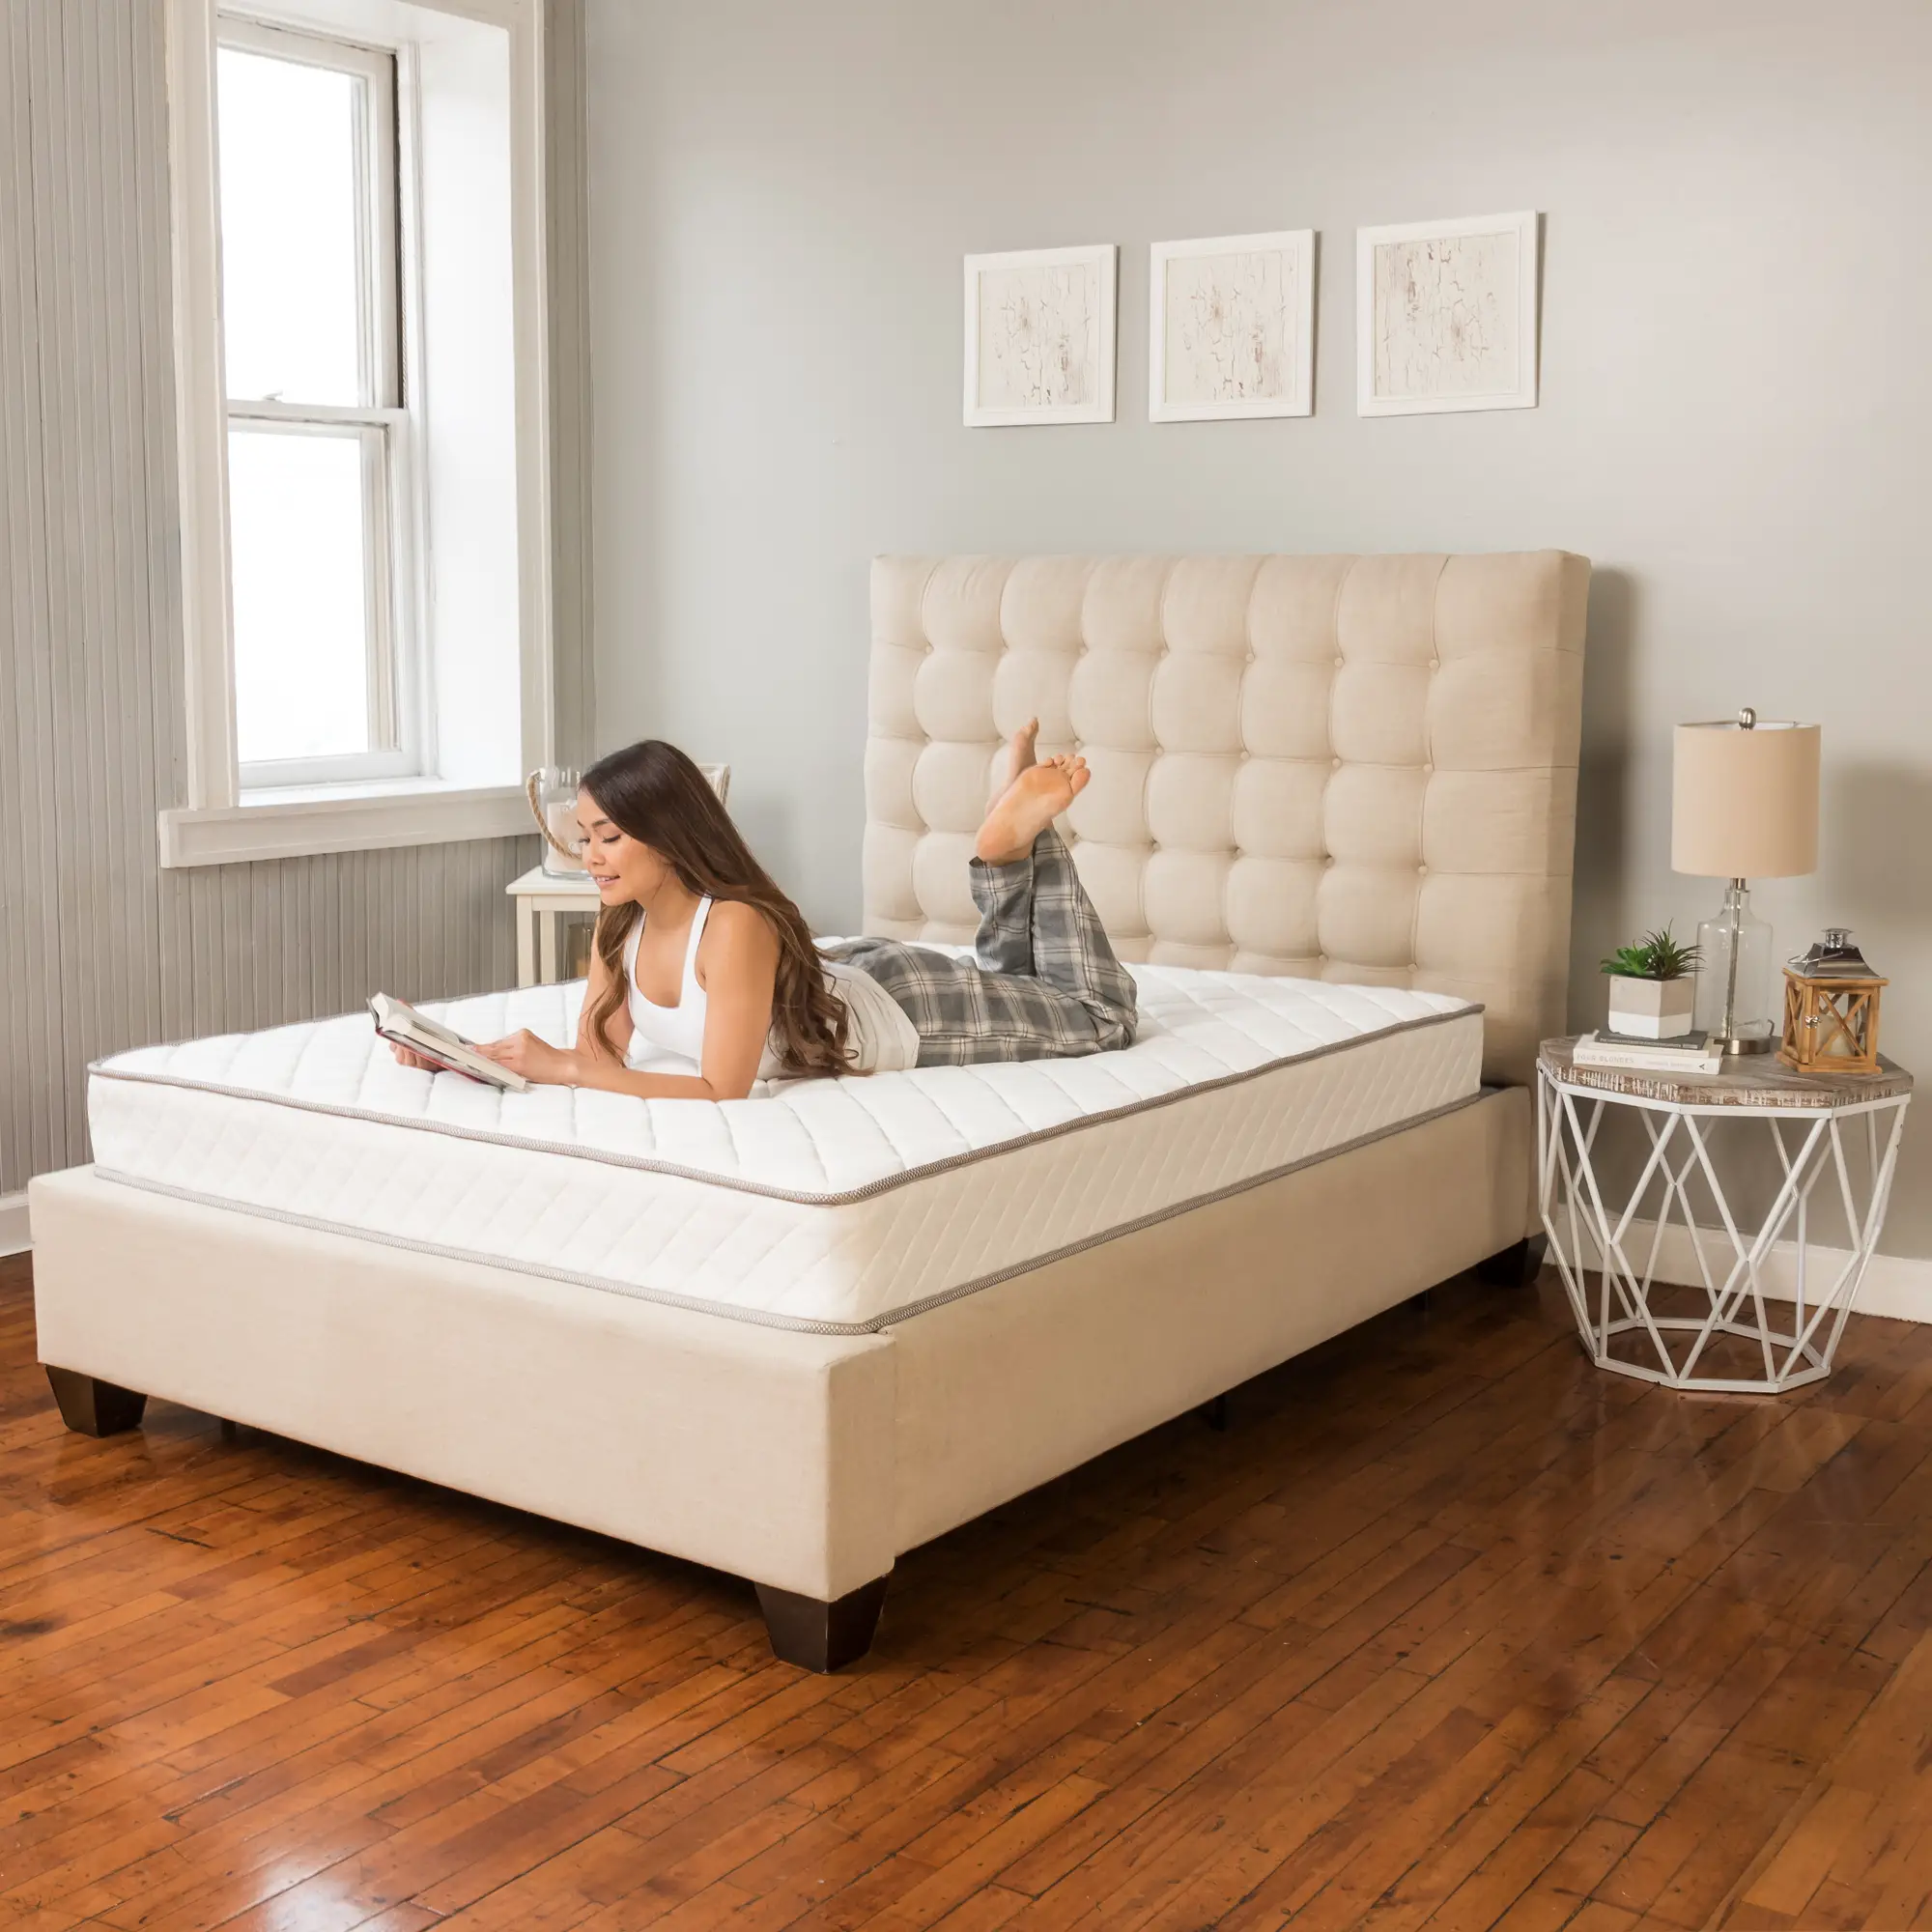 Best Rated Innerspring Mattress Under $300 For 2019